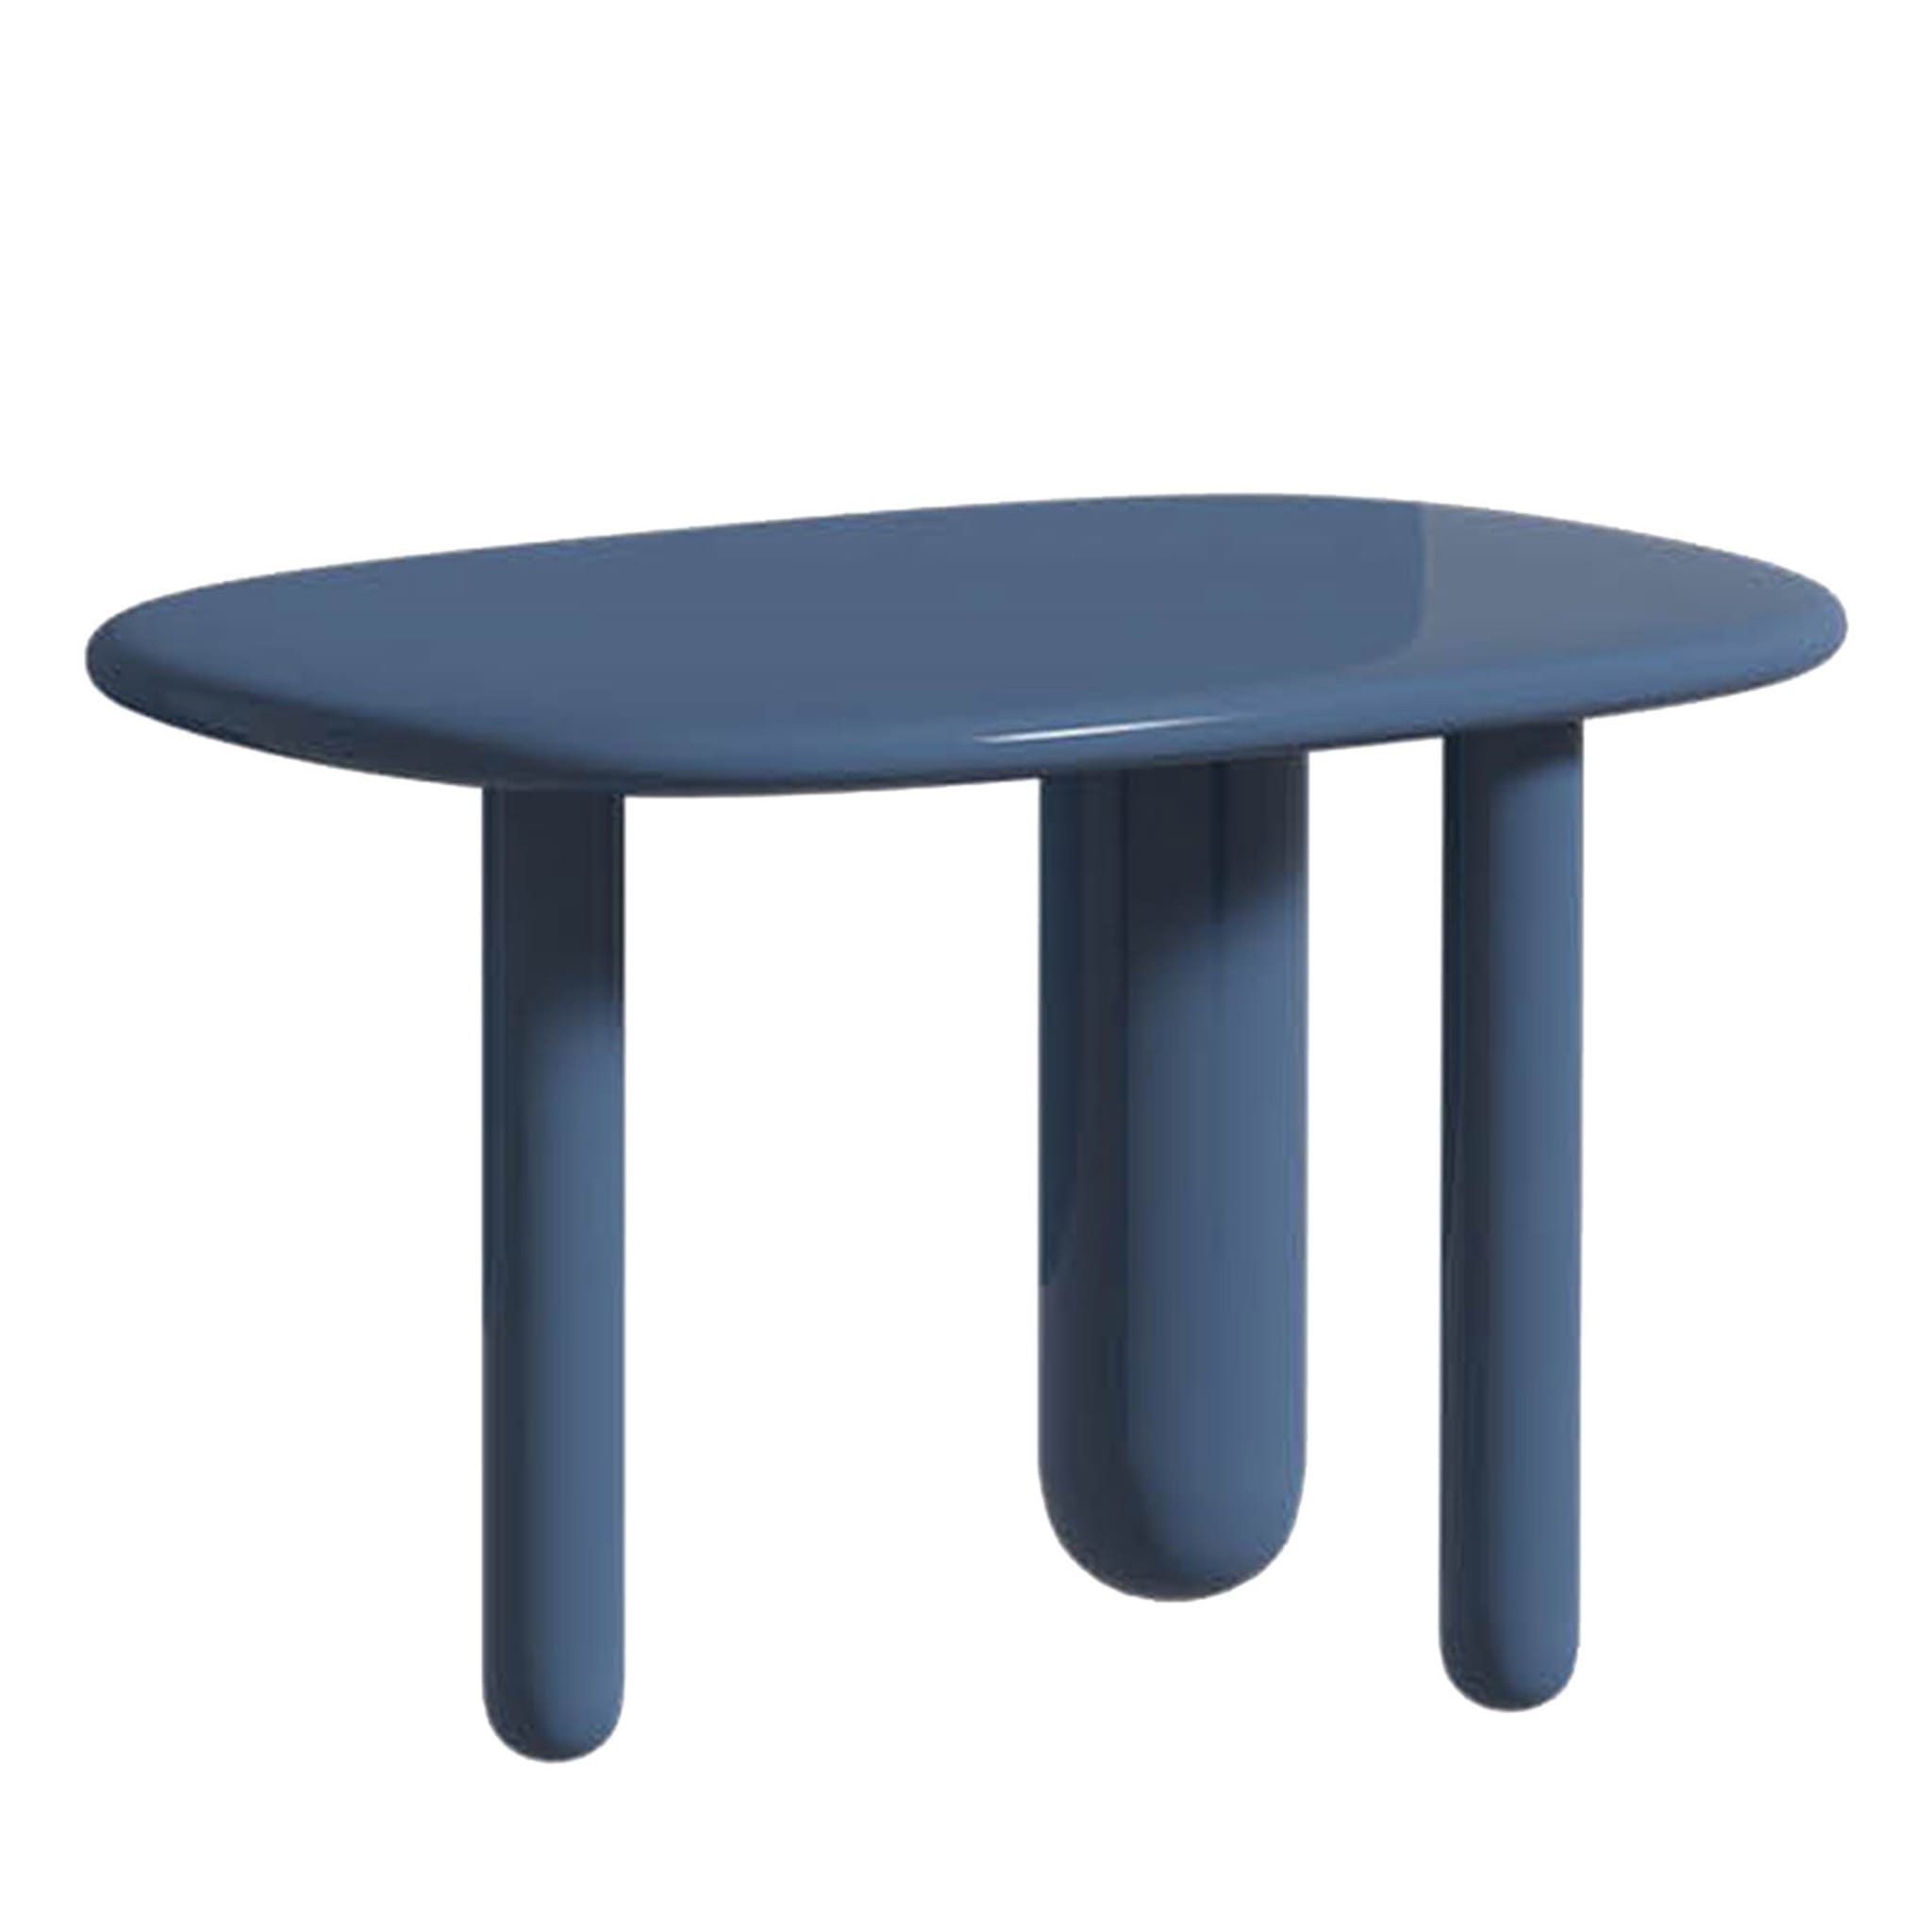 Tottori Blue Side Table by Kateryna Sokolova - Main view